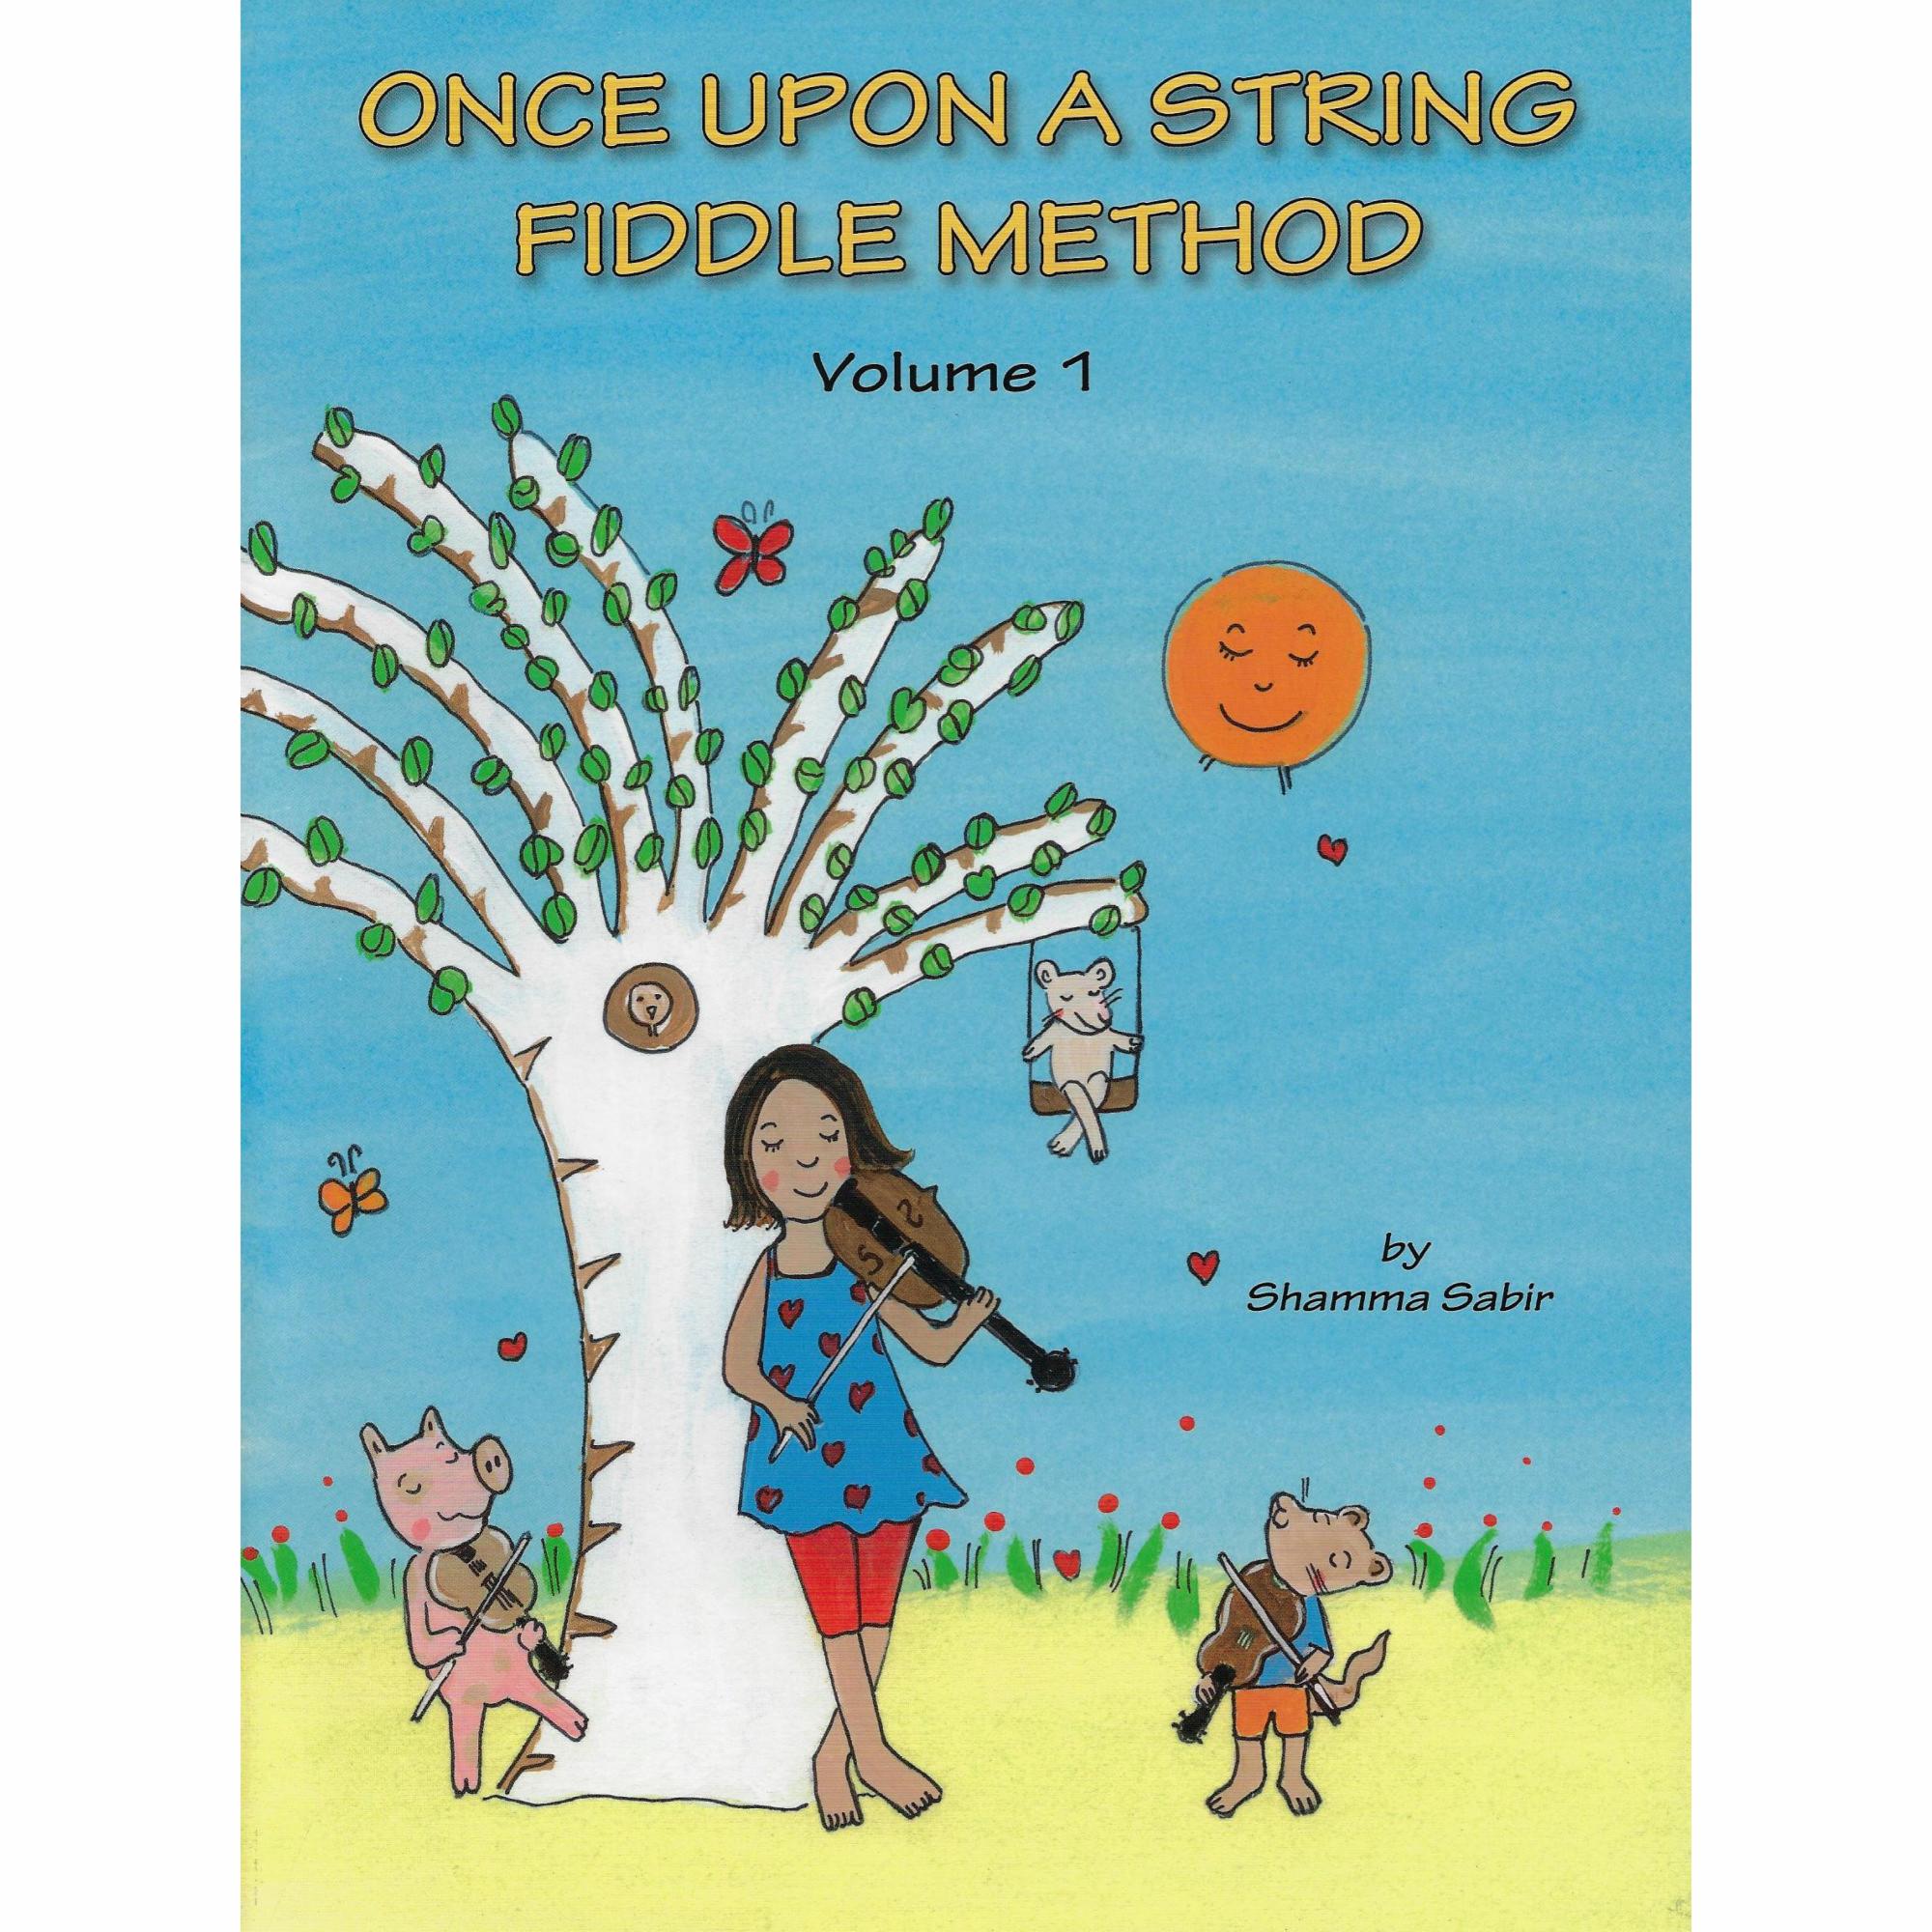 Once Upon a String Fiddle Method